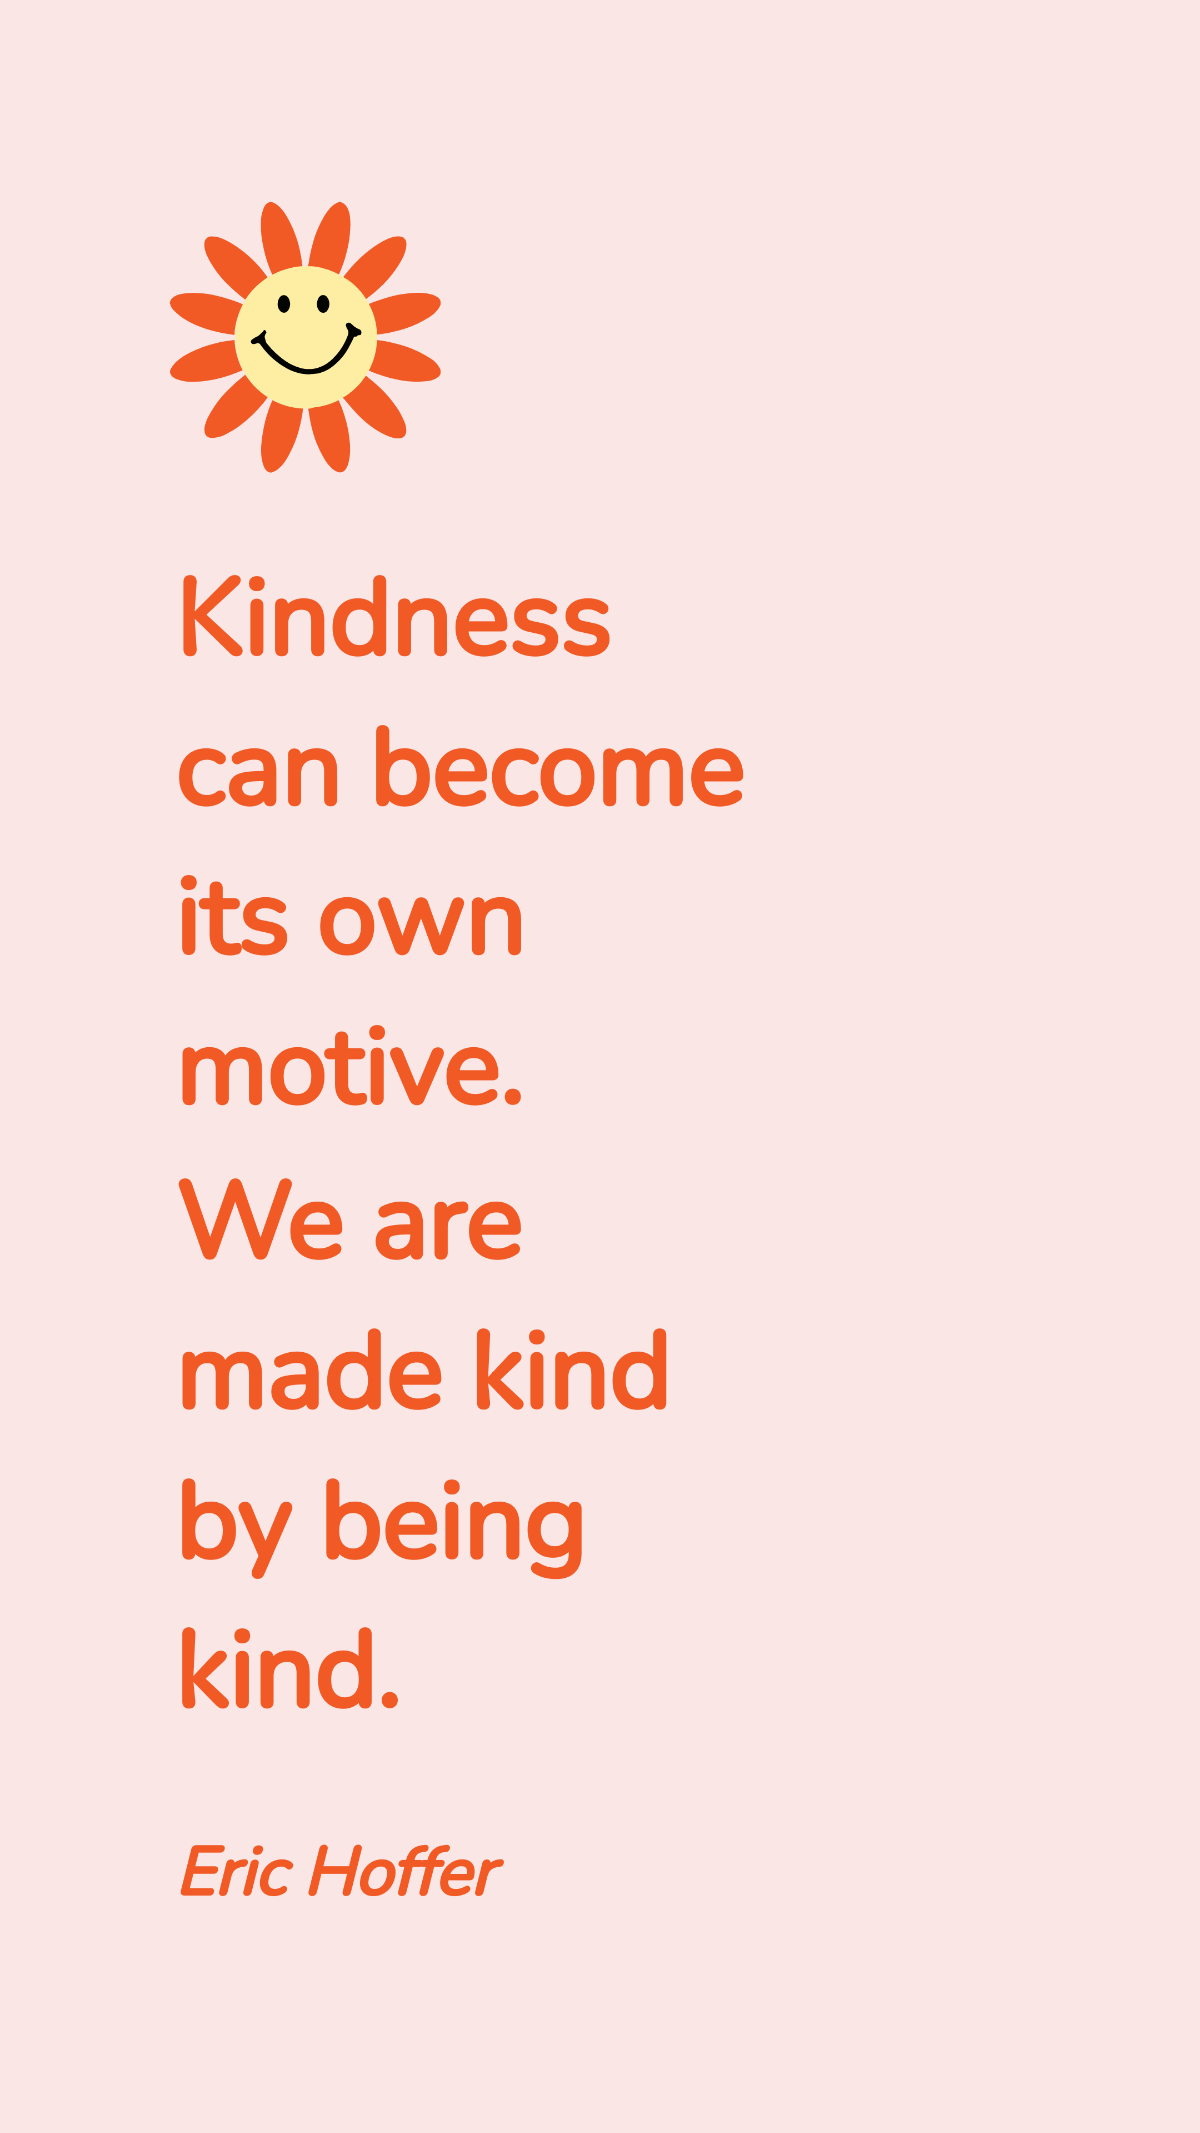 Free Eric Hoffer - Kindness can become its own motive. We are made kind by being kind. Template